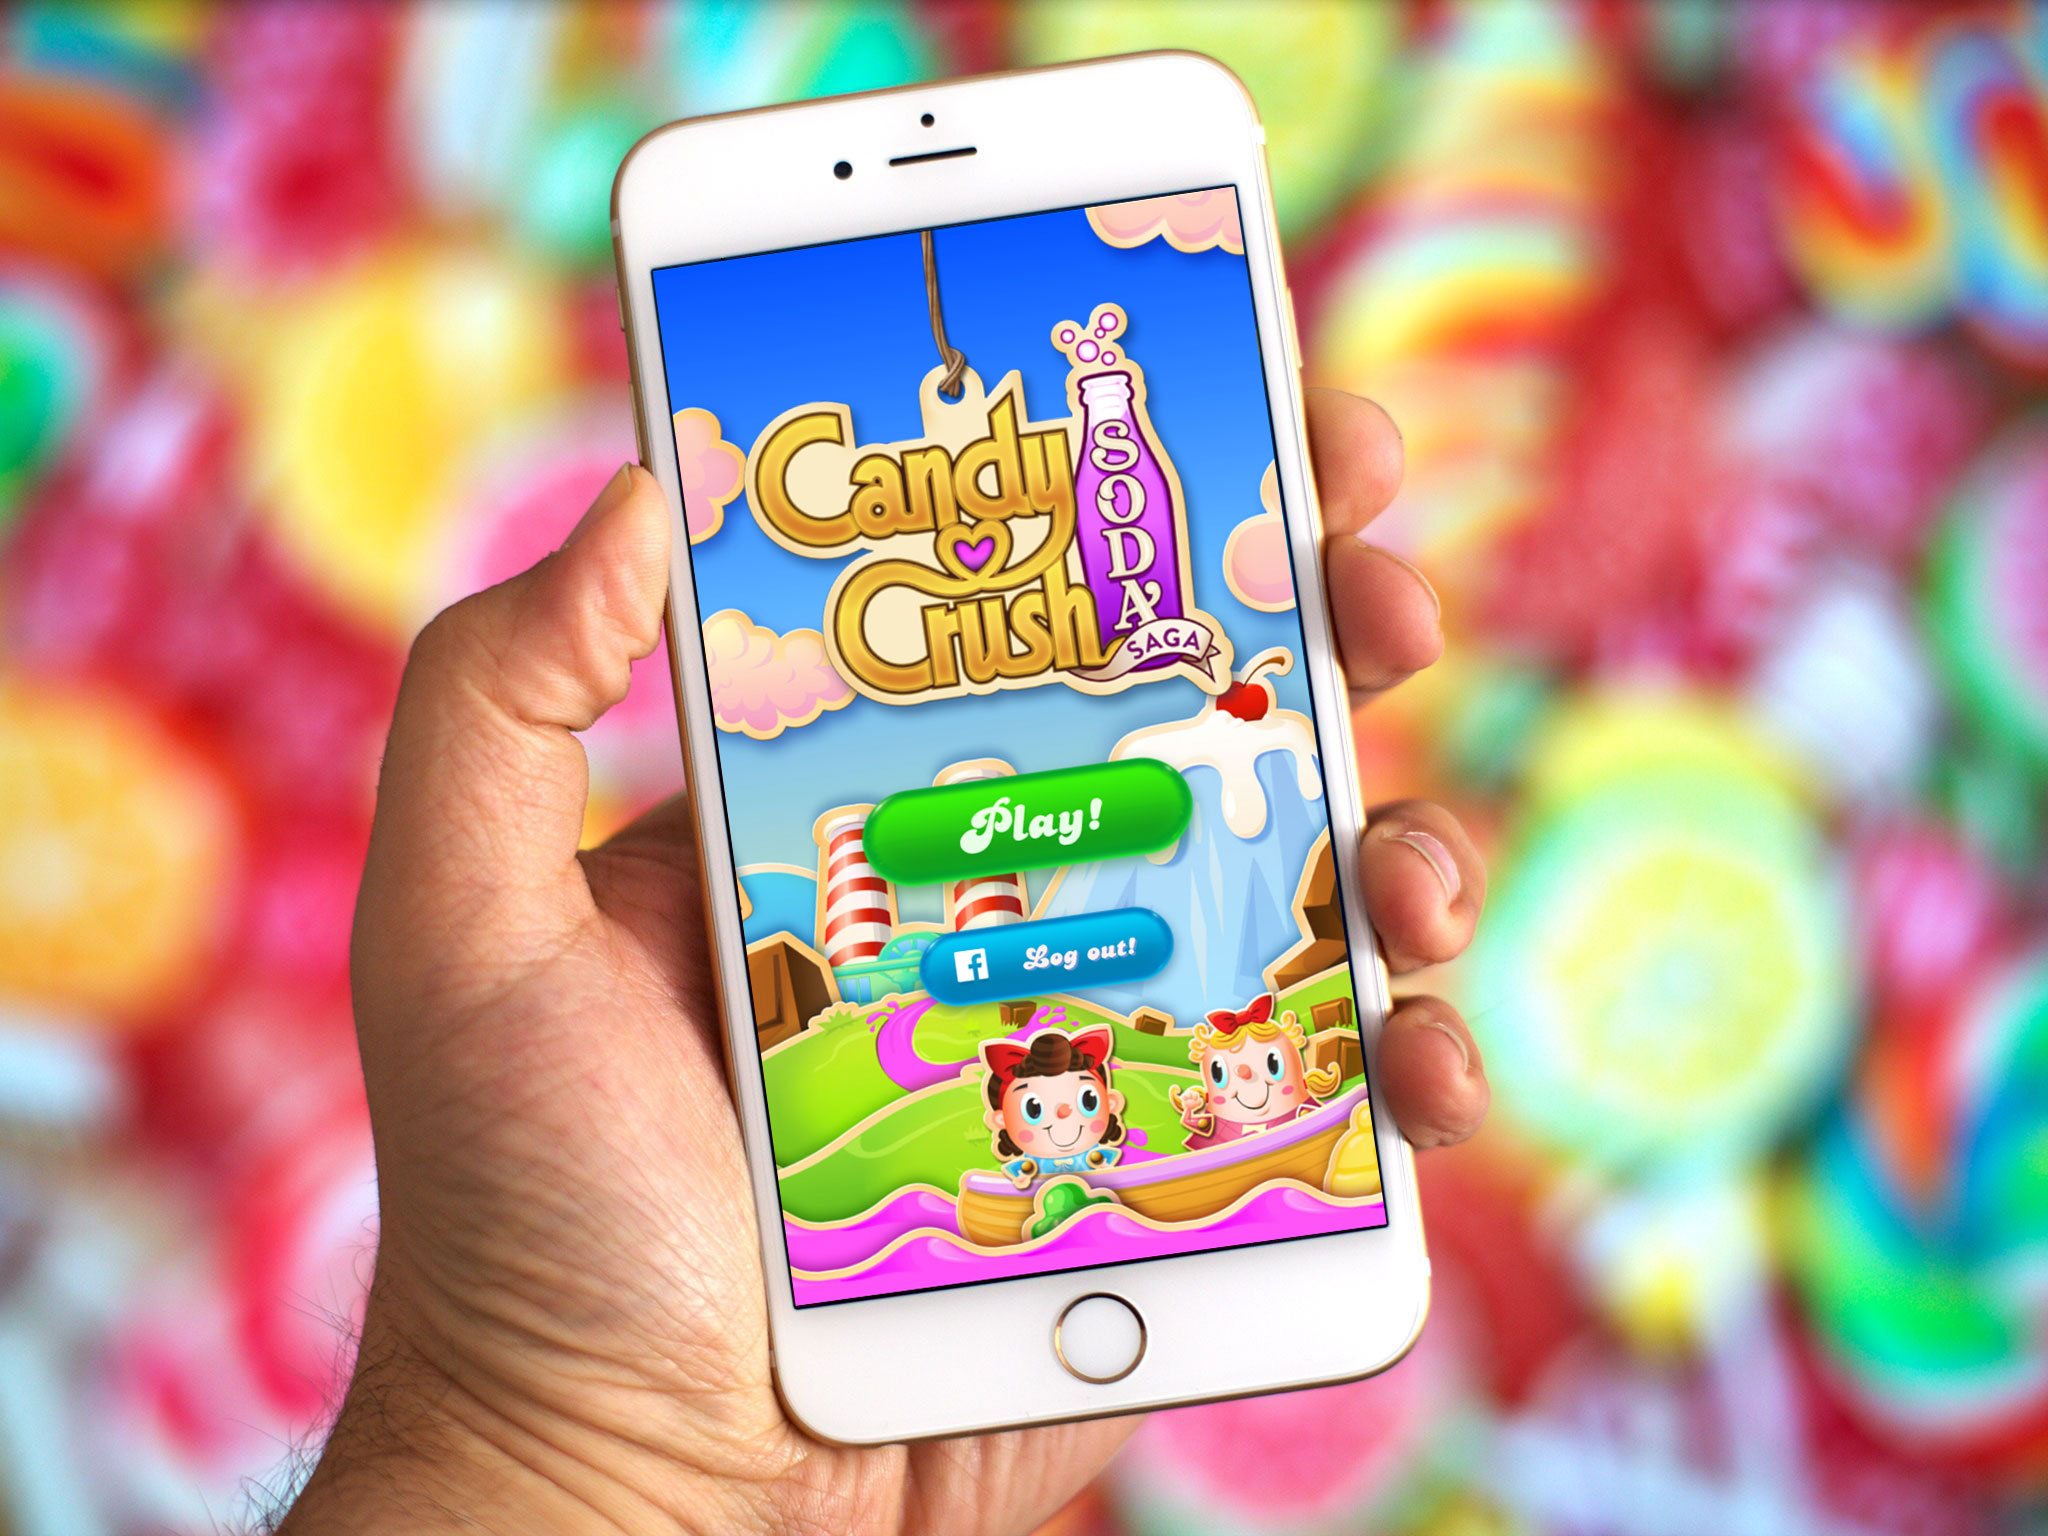 Candy Crush Saga - Game Guides, News and Updates